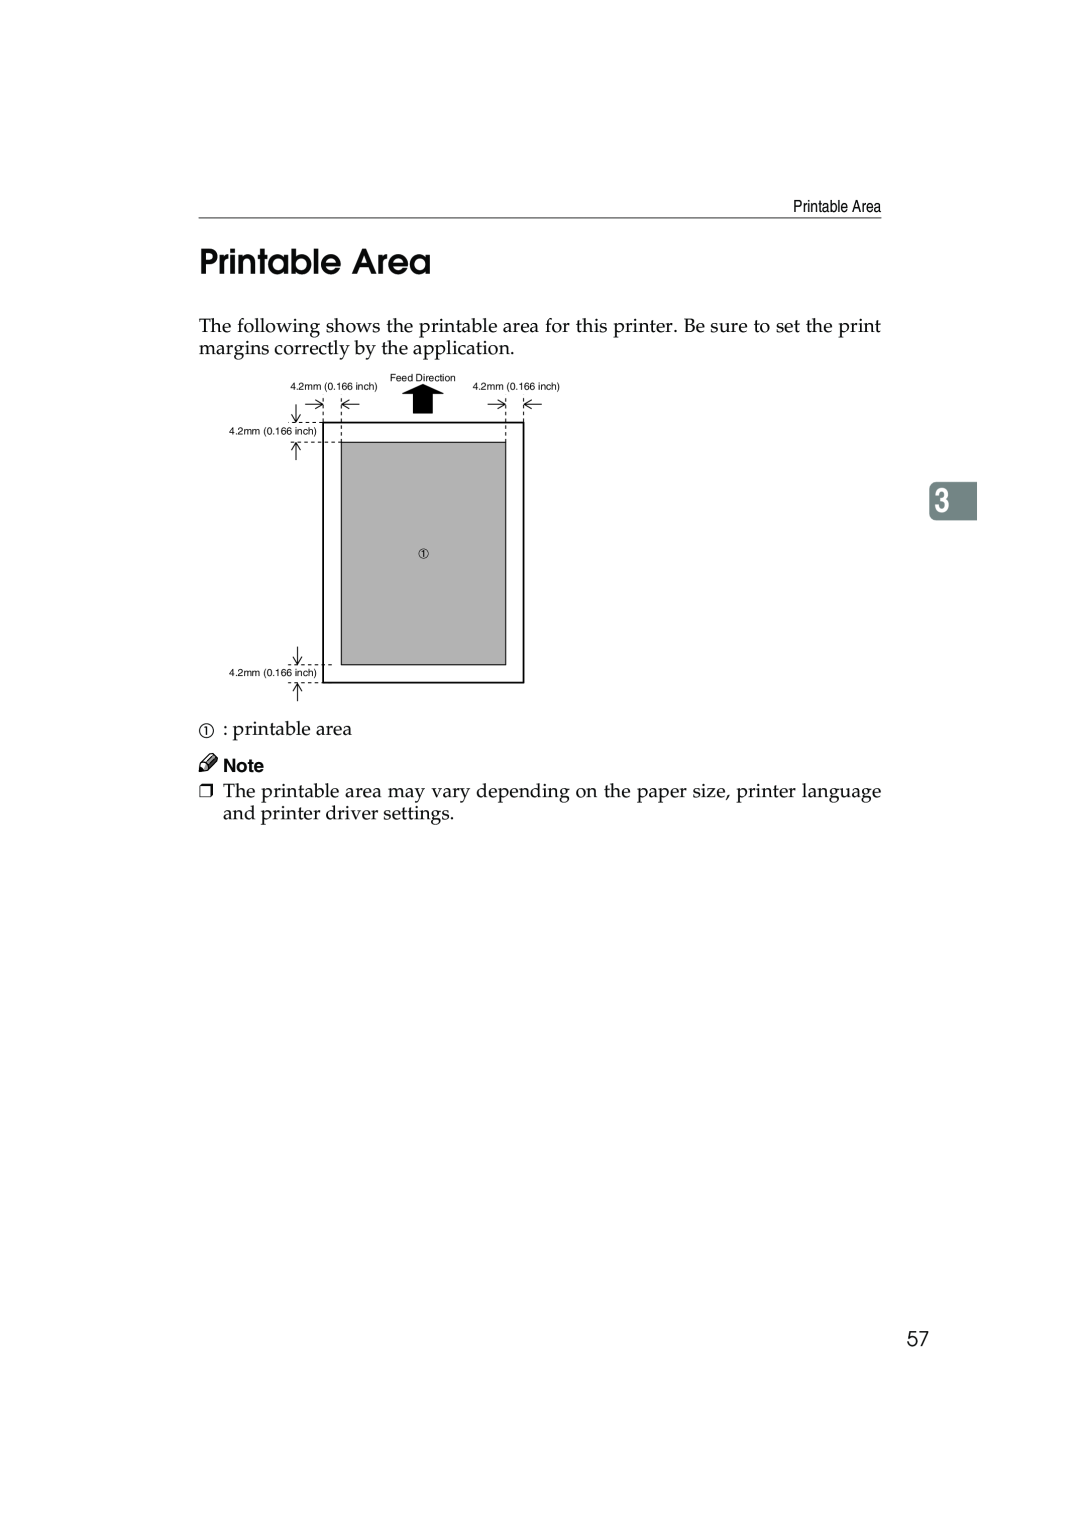 Ricoh AP3800C operating instructions Printable Area 